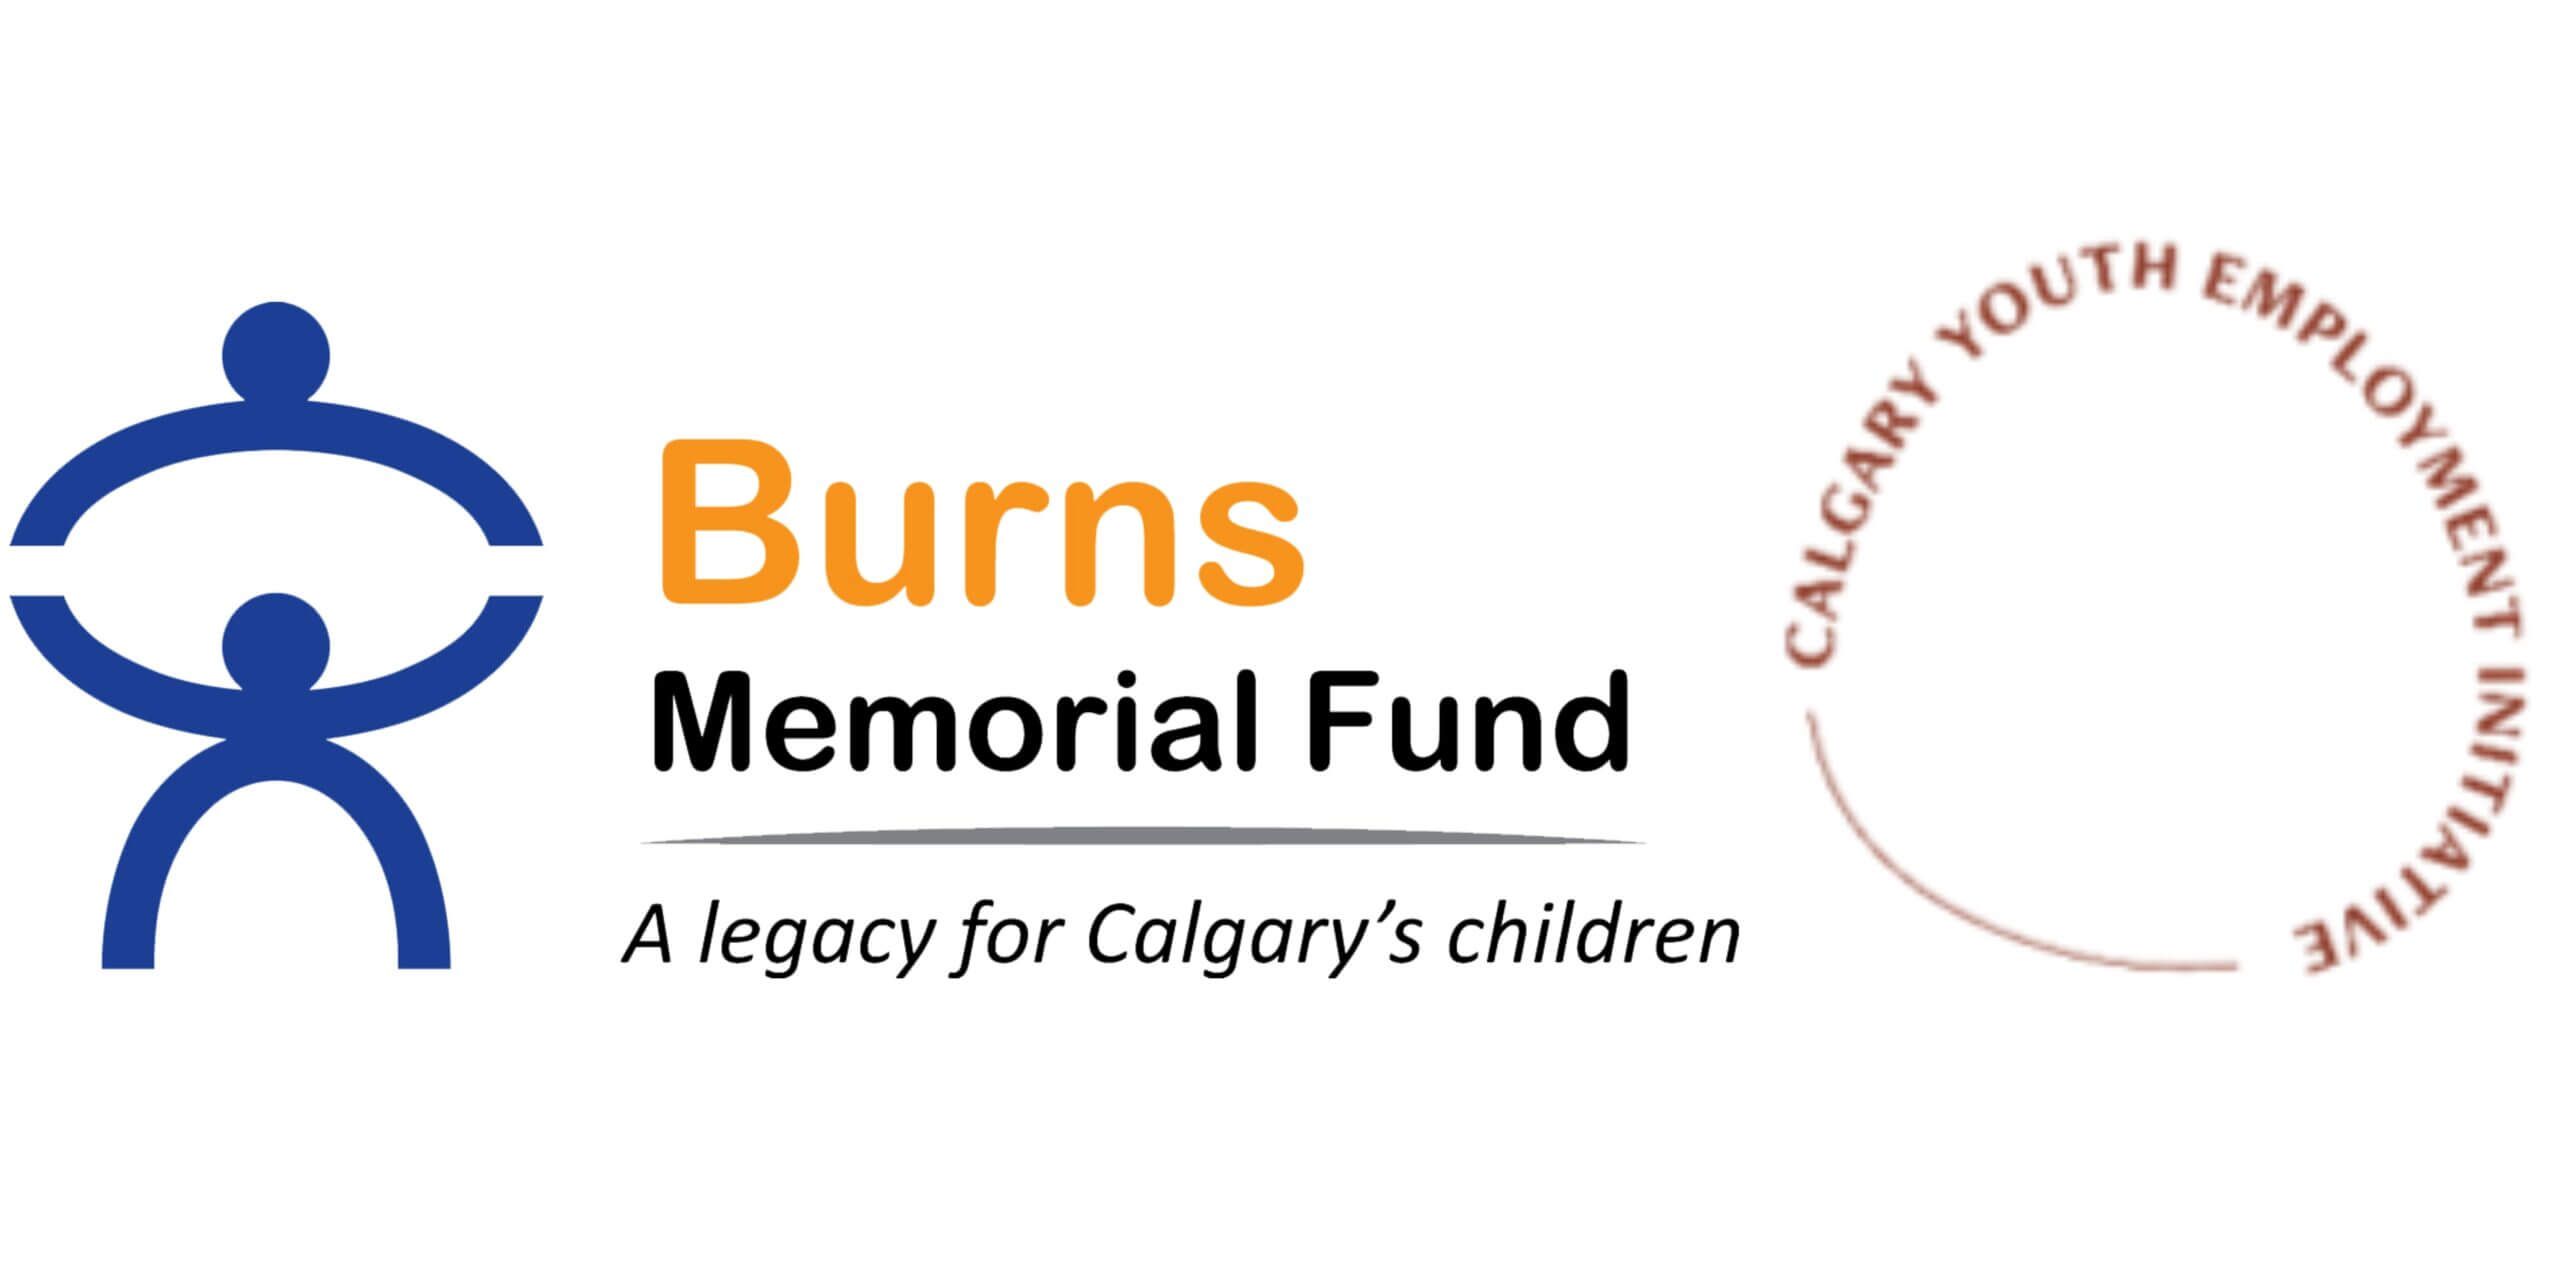 Burns Memorial Fund logo in orange and black font text with blue icon and Calgary Youth Employment Initiative logo in red font text